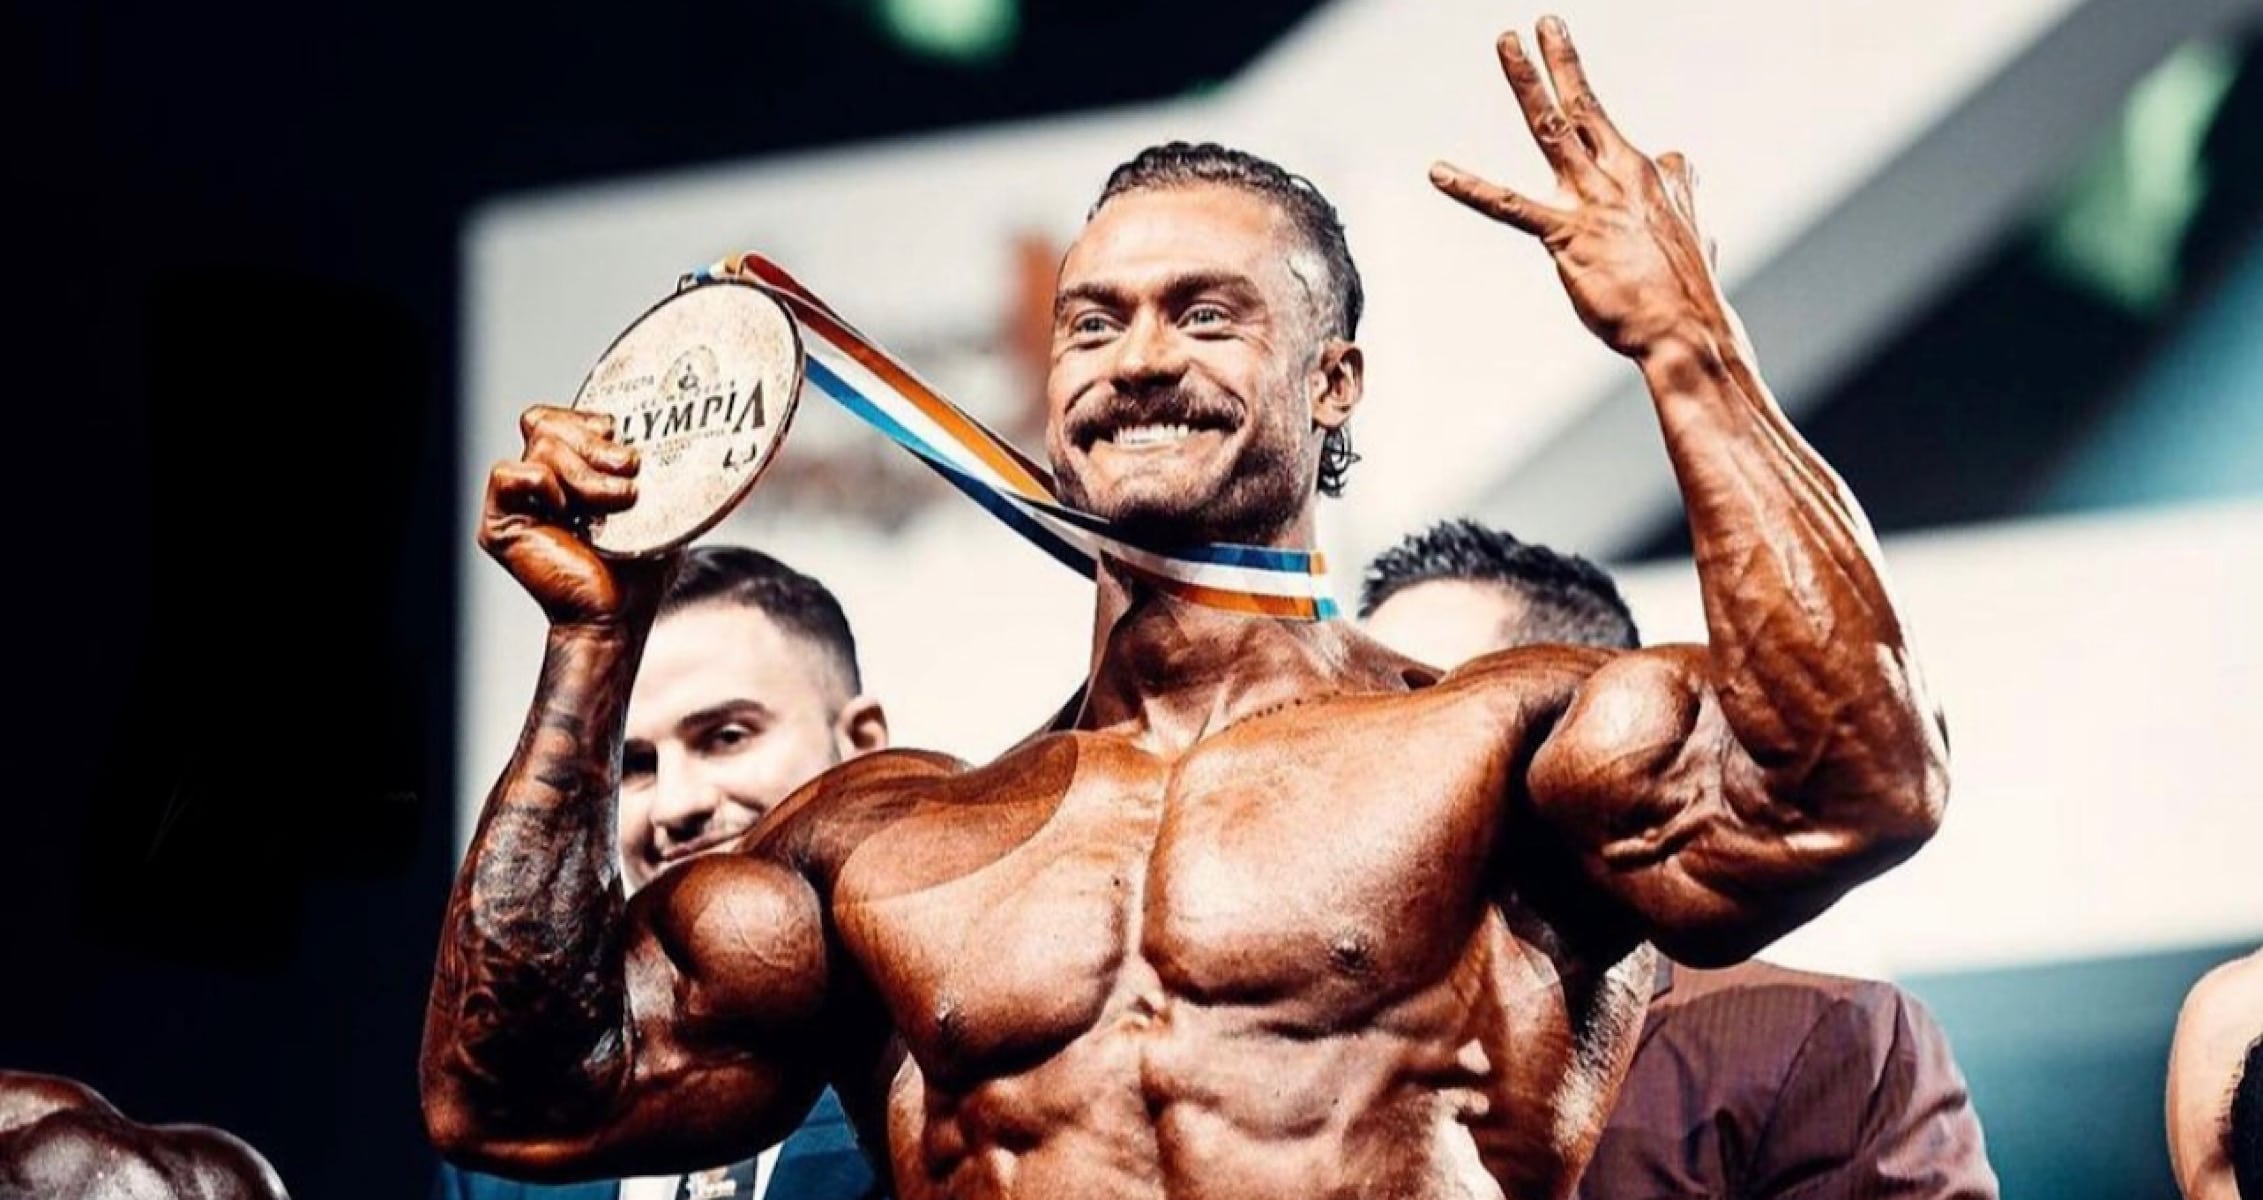 Chris Bumstead Makes Statement After Olympia Win